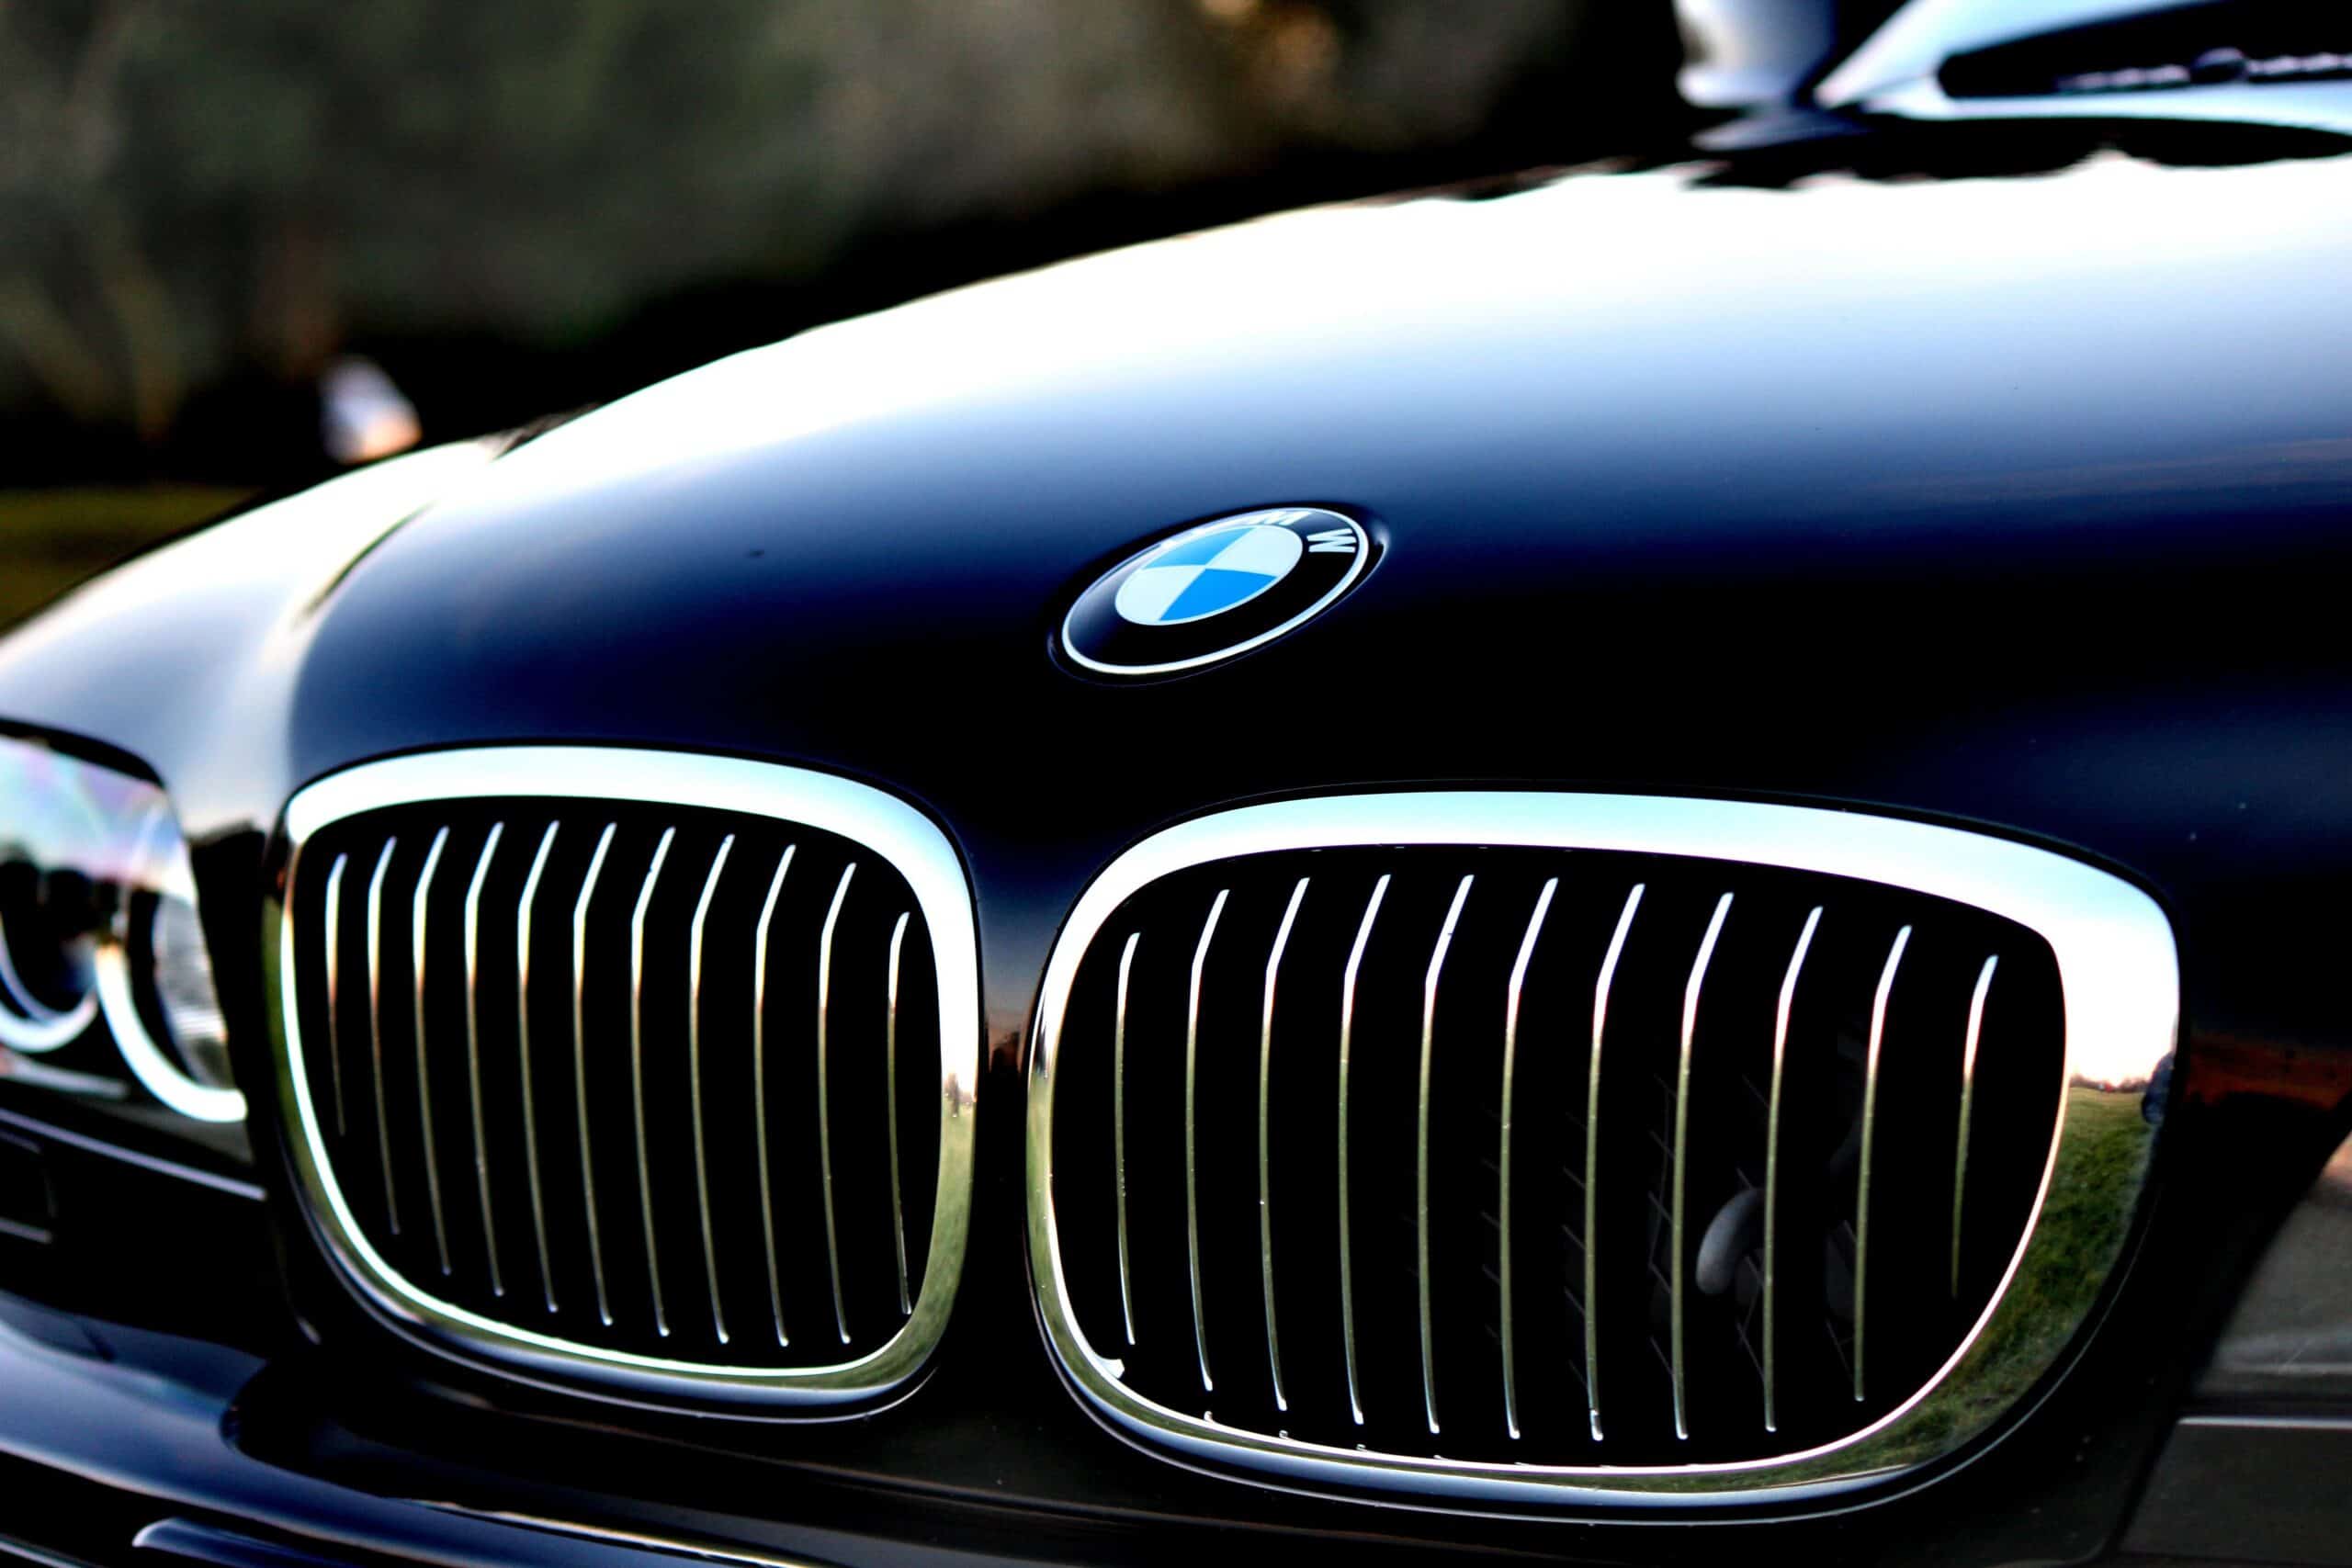 The front grill of a black BMW car